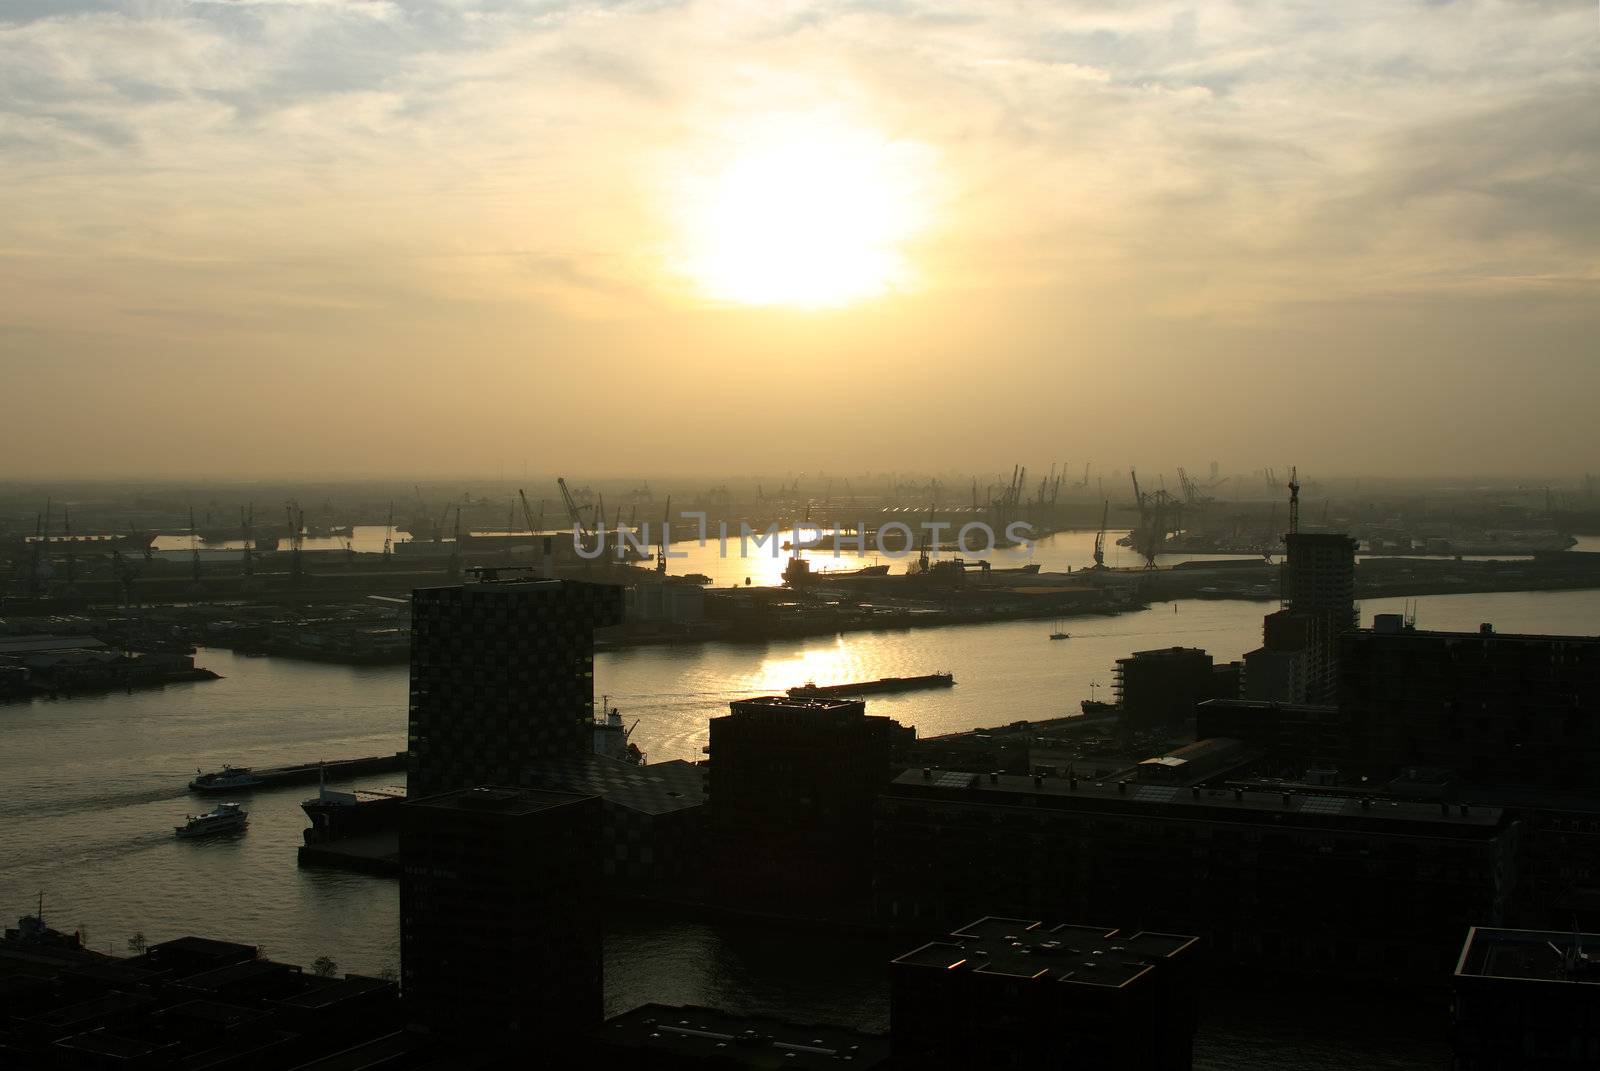 The harbor from Rotterdam in the Netherlands by devy